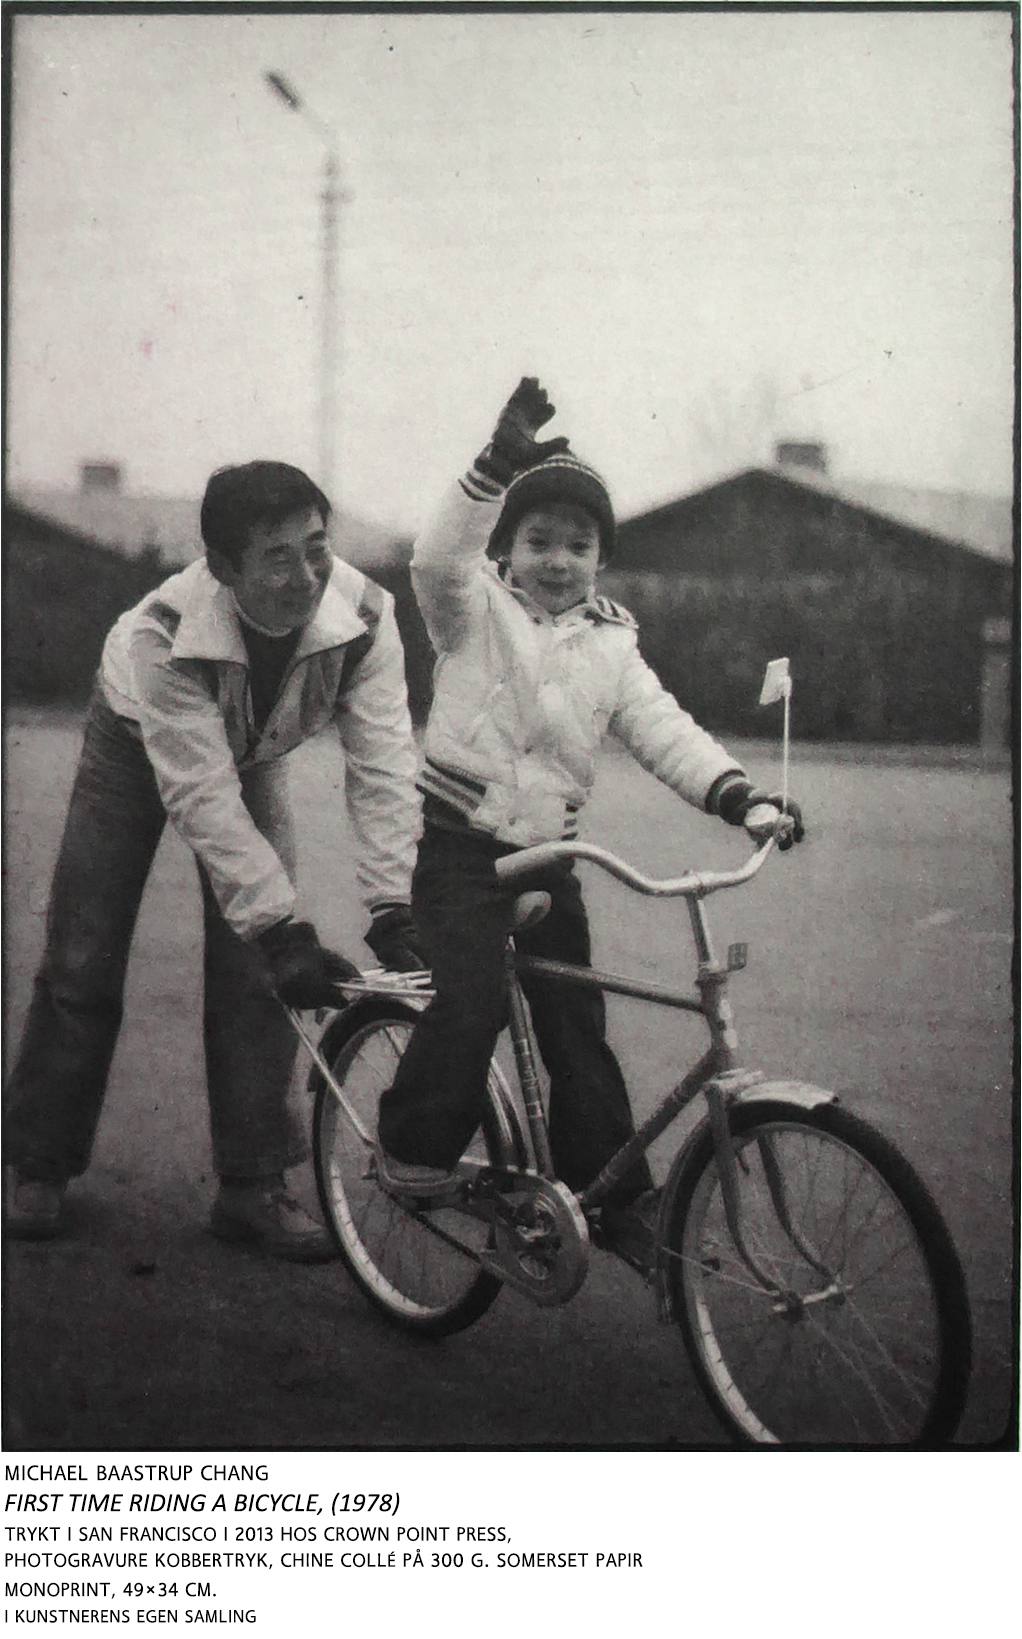 photo of michael baastrup chang and his father